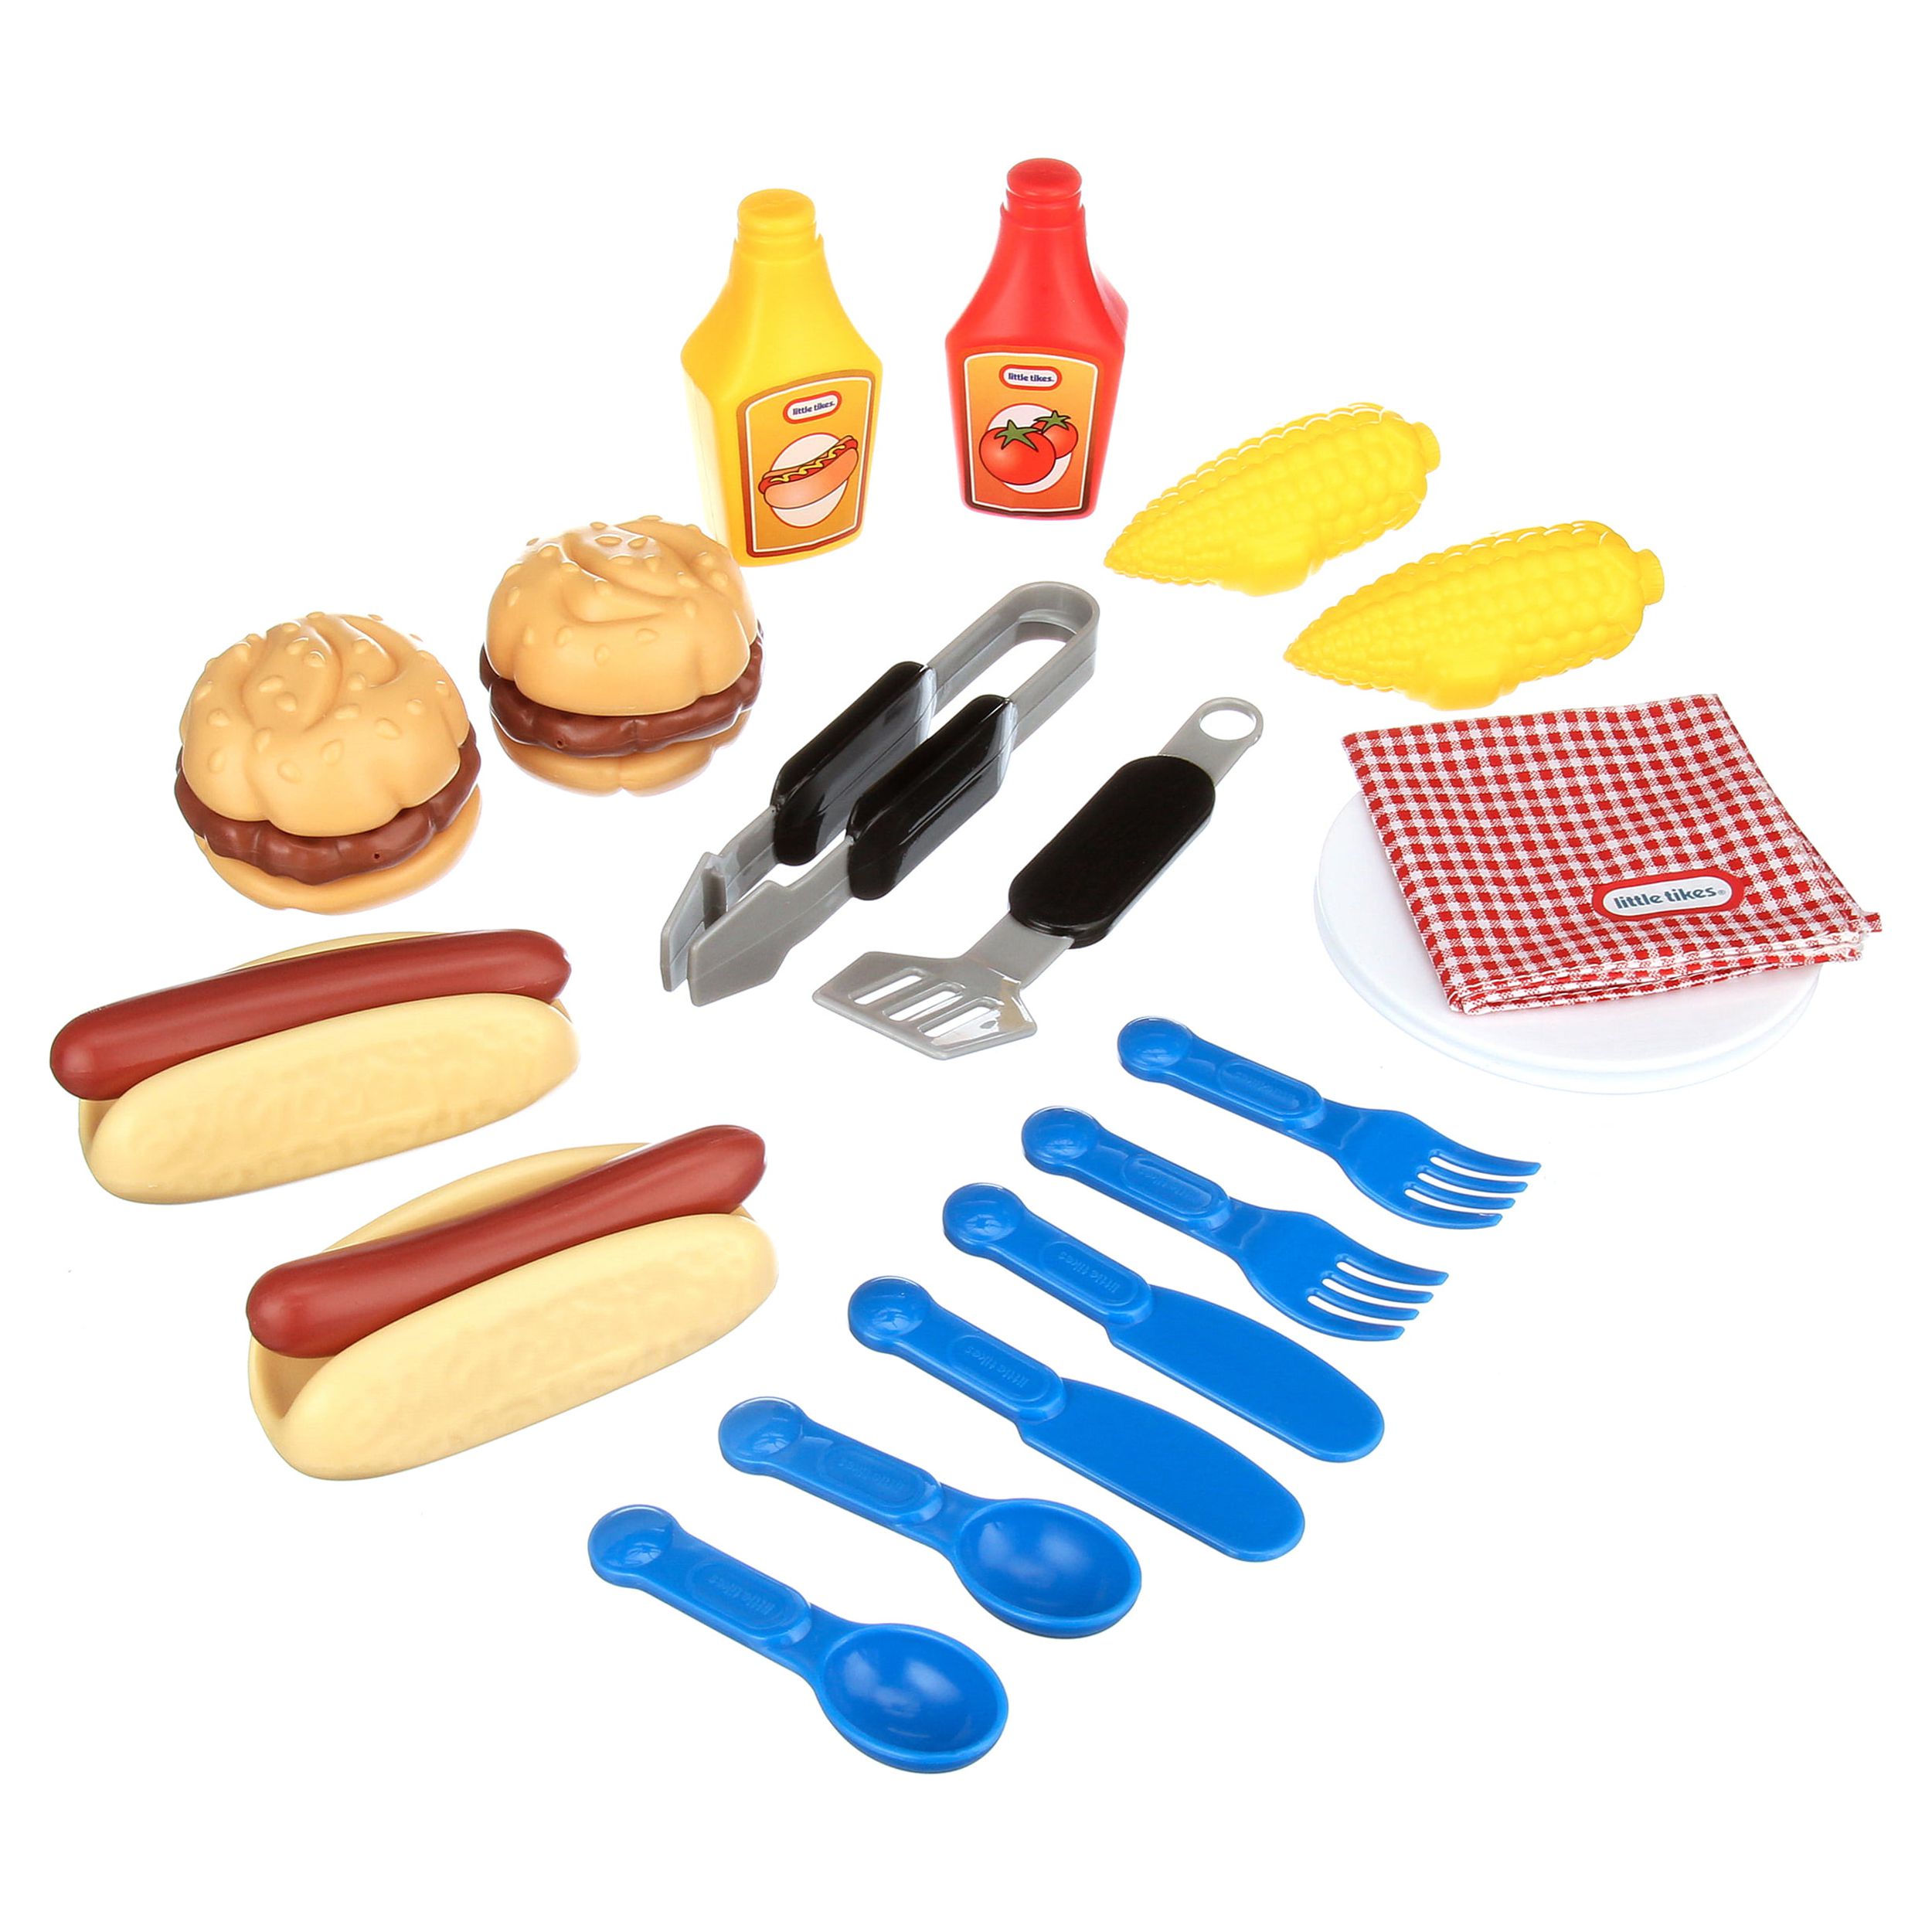 Little Tikes Backyard Barbeque, 26- Piece Plastic Play Food Toys Pretend Play Set, Grillin' Goodies for Picnic Pretend Play, Multicolor- for Kids Toddlers Girls Boys Ages 3 4 5+ - image 4 of 8